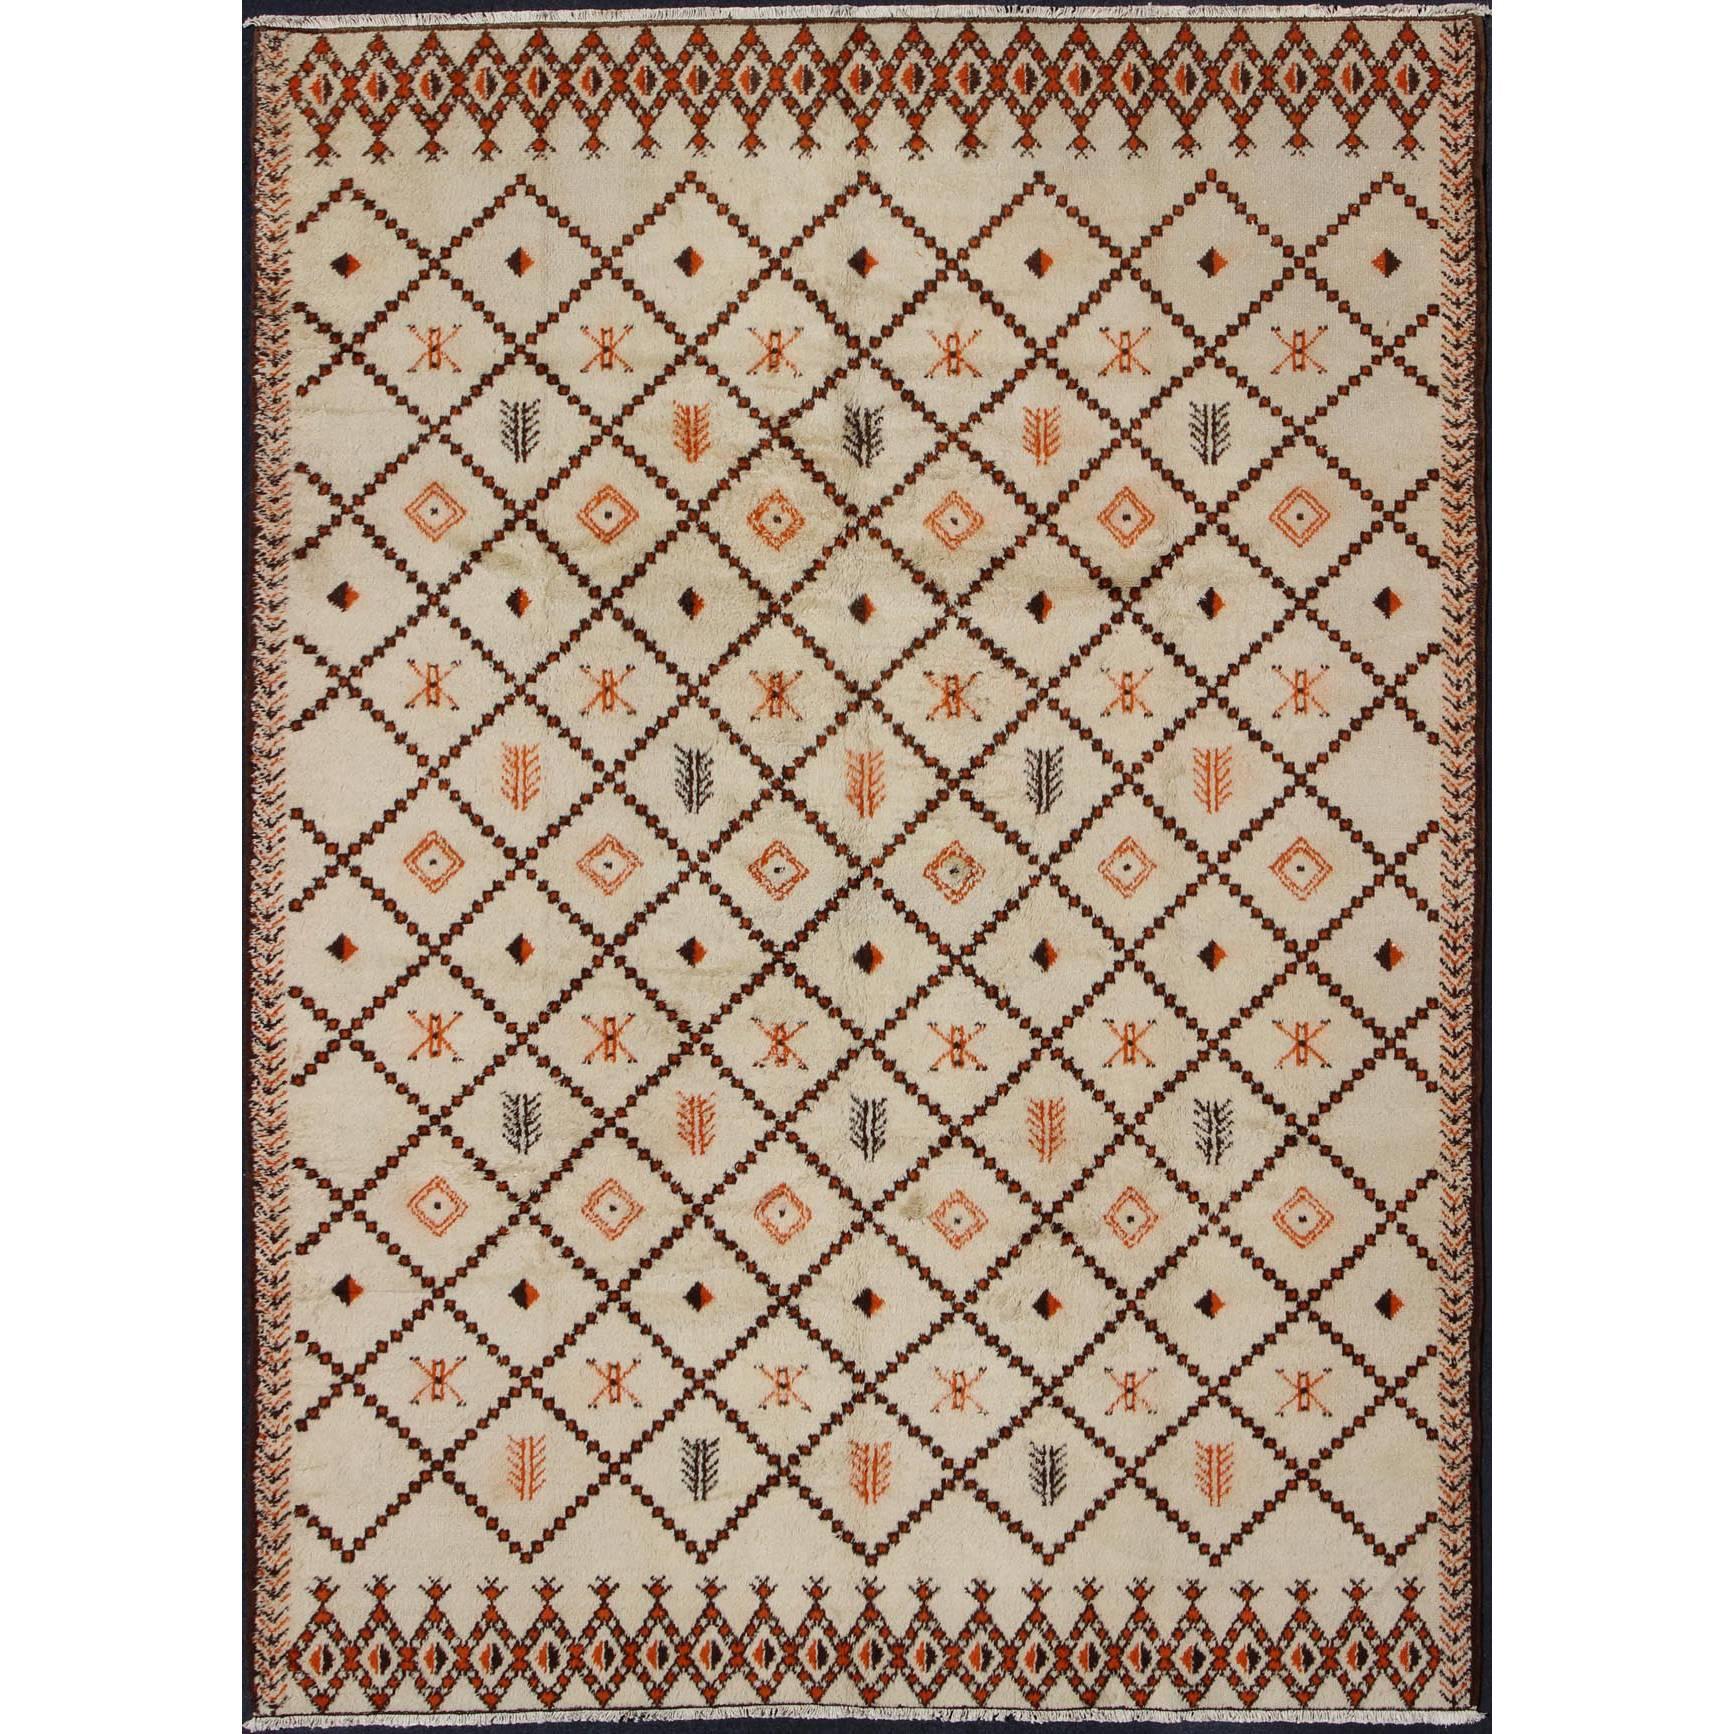 Large Vintage Moroccan Rug in Diamond Design with Ivory and Brown Outlines